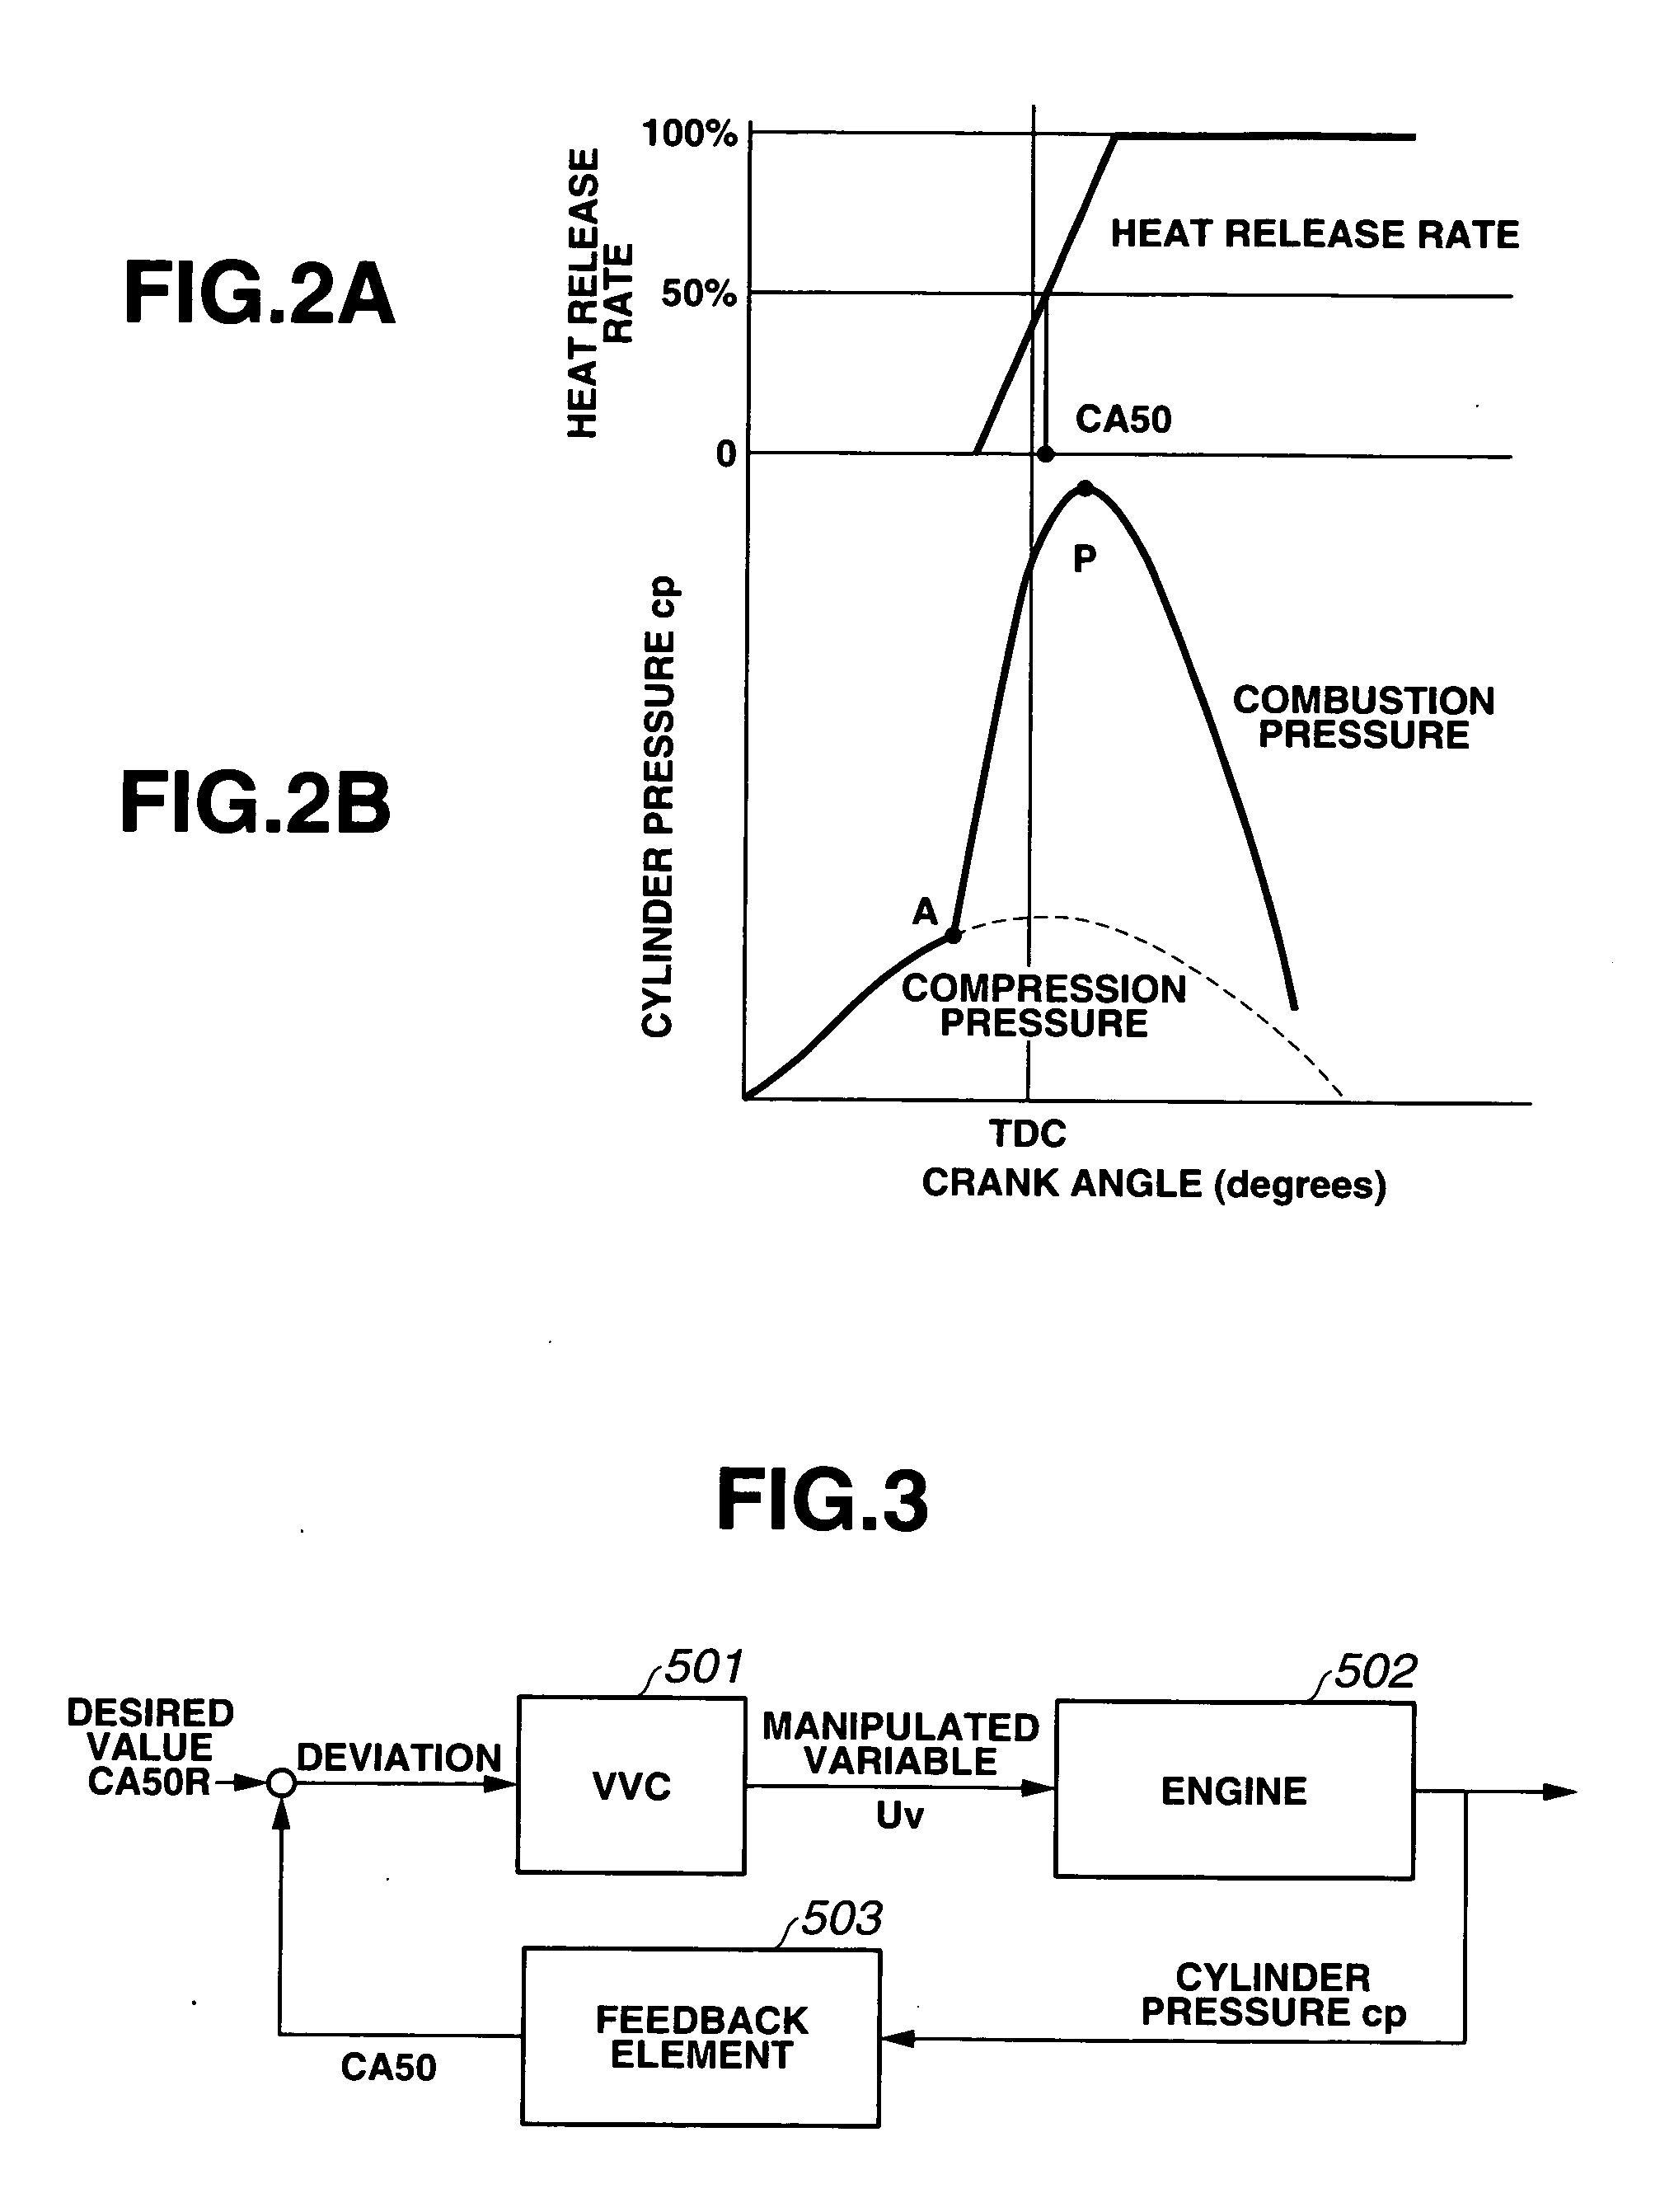 Control apparatus for controlling internal combustion engines